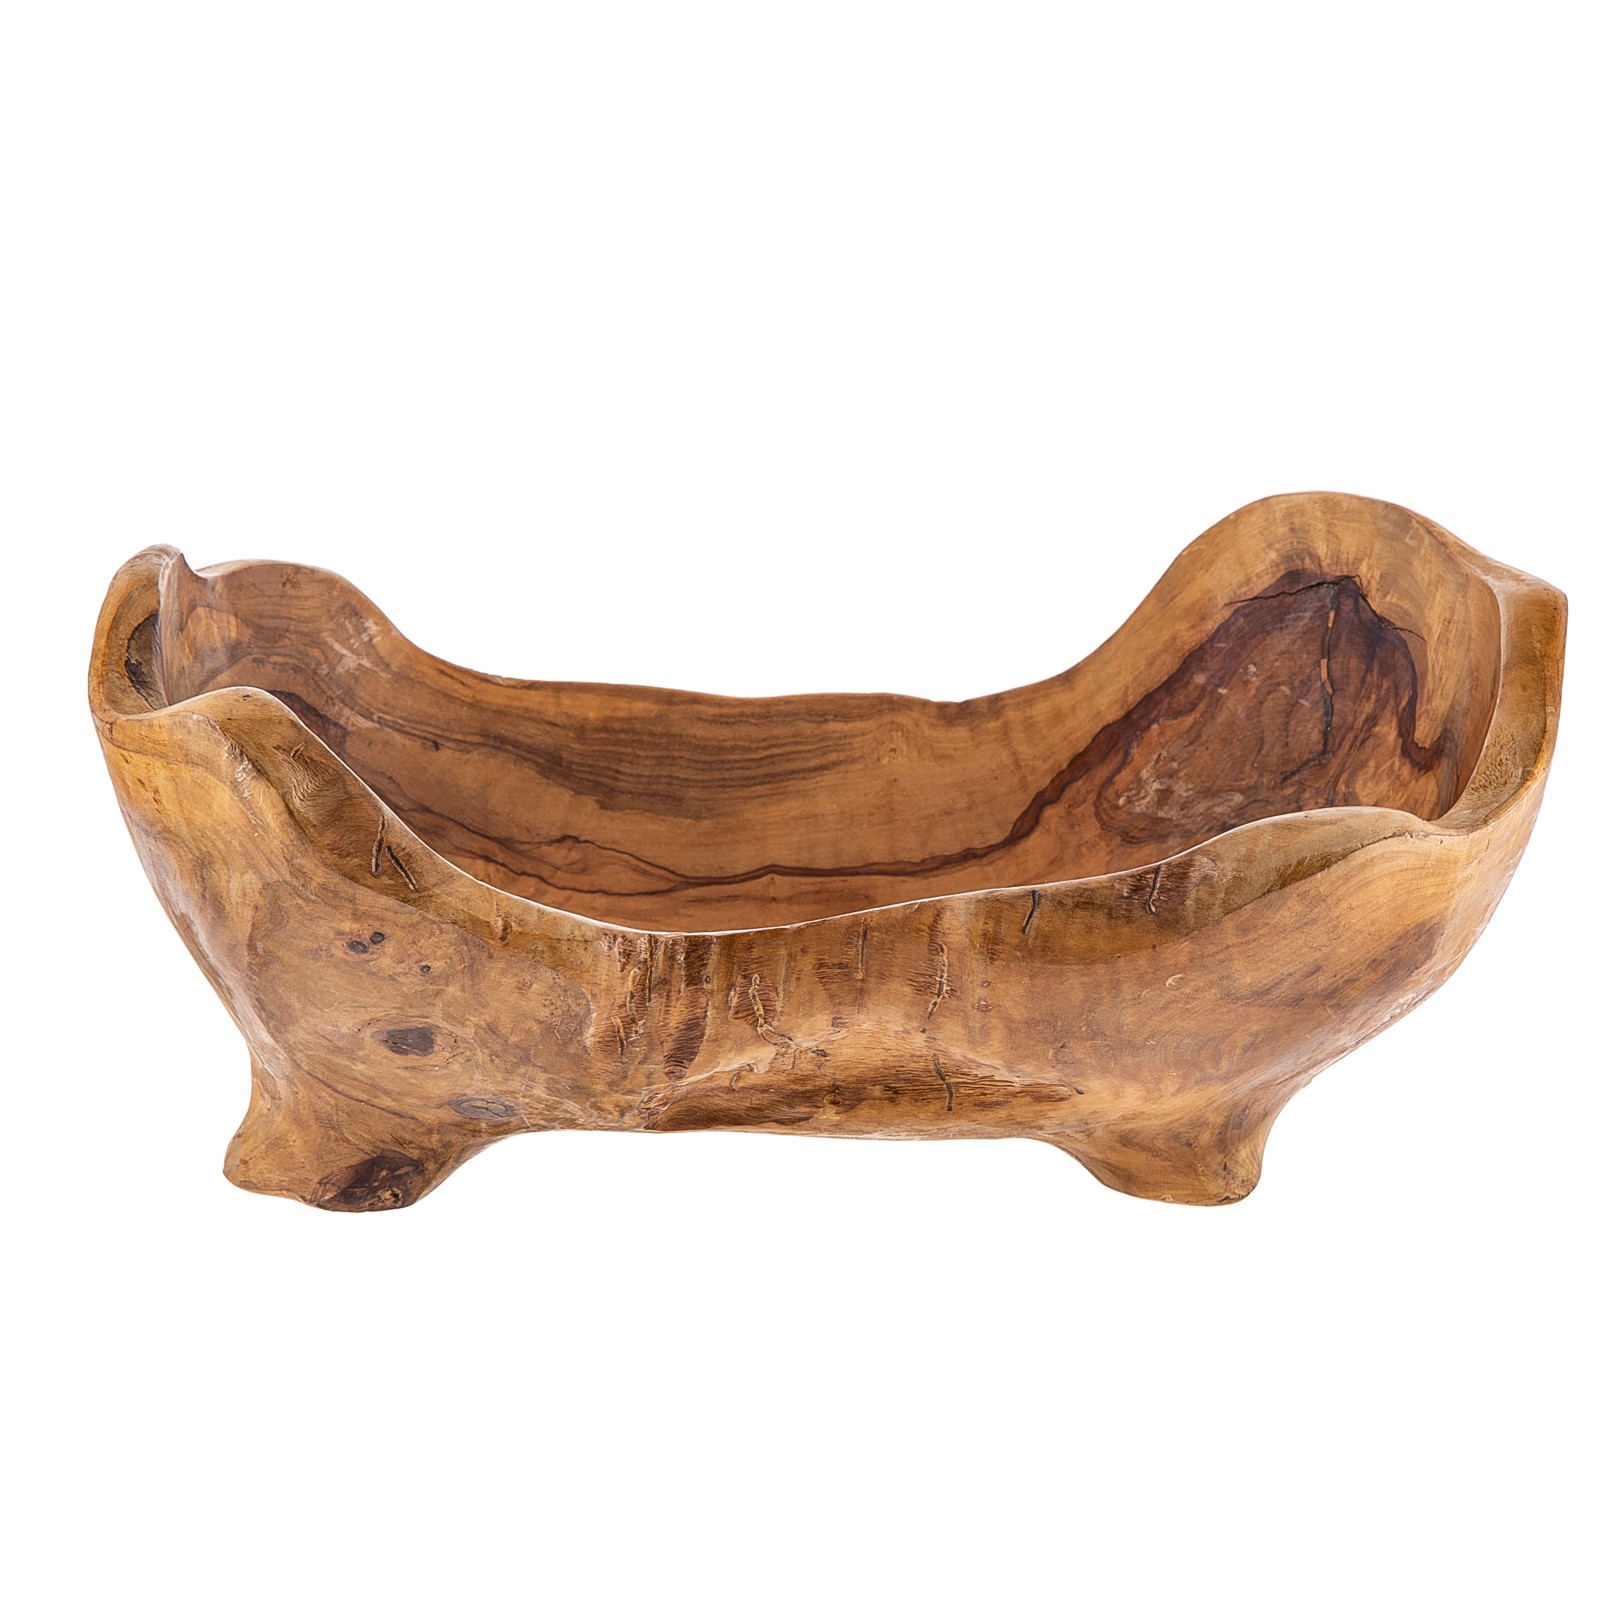 CONTEMPORARY BURL WOOD BOWL Oval